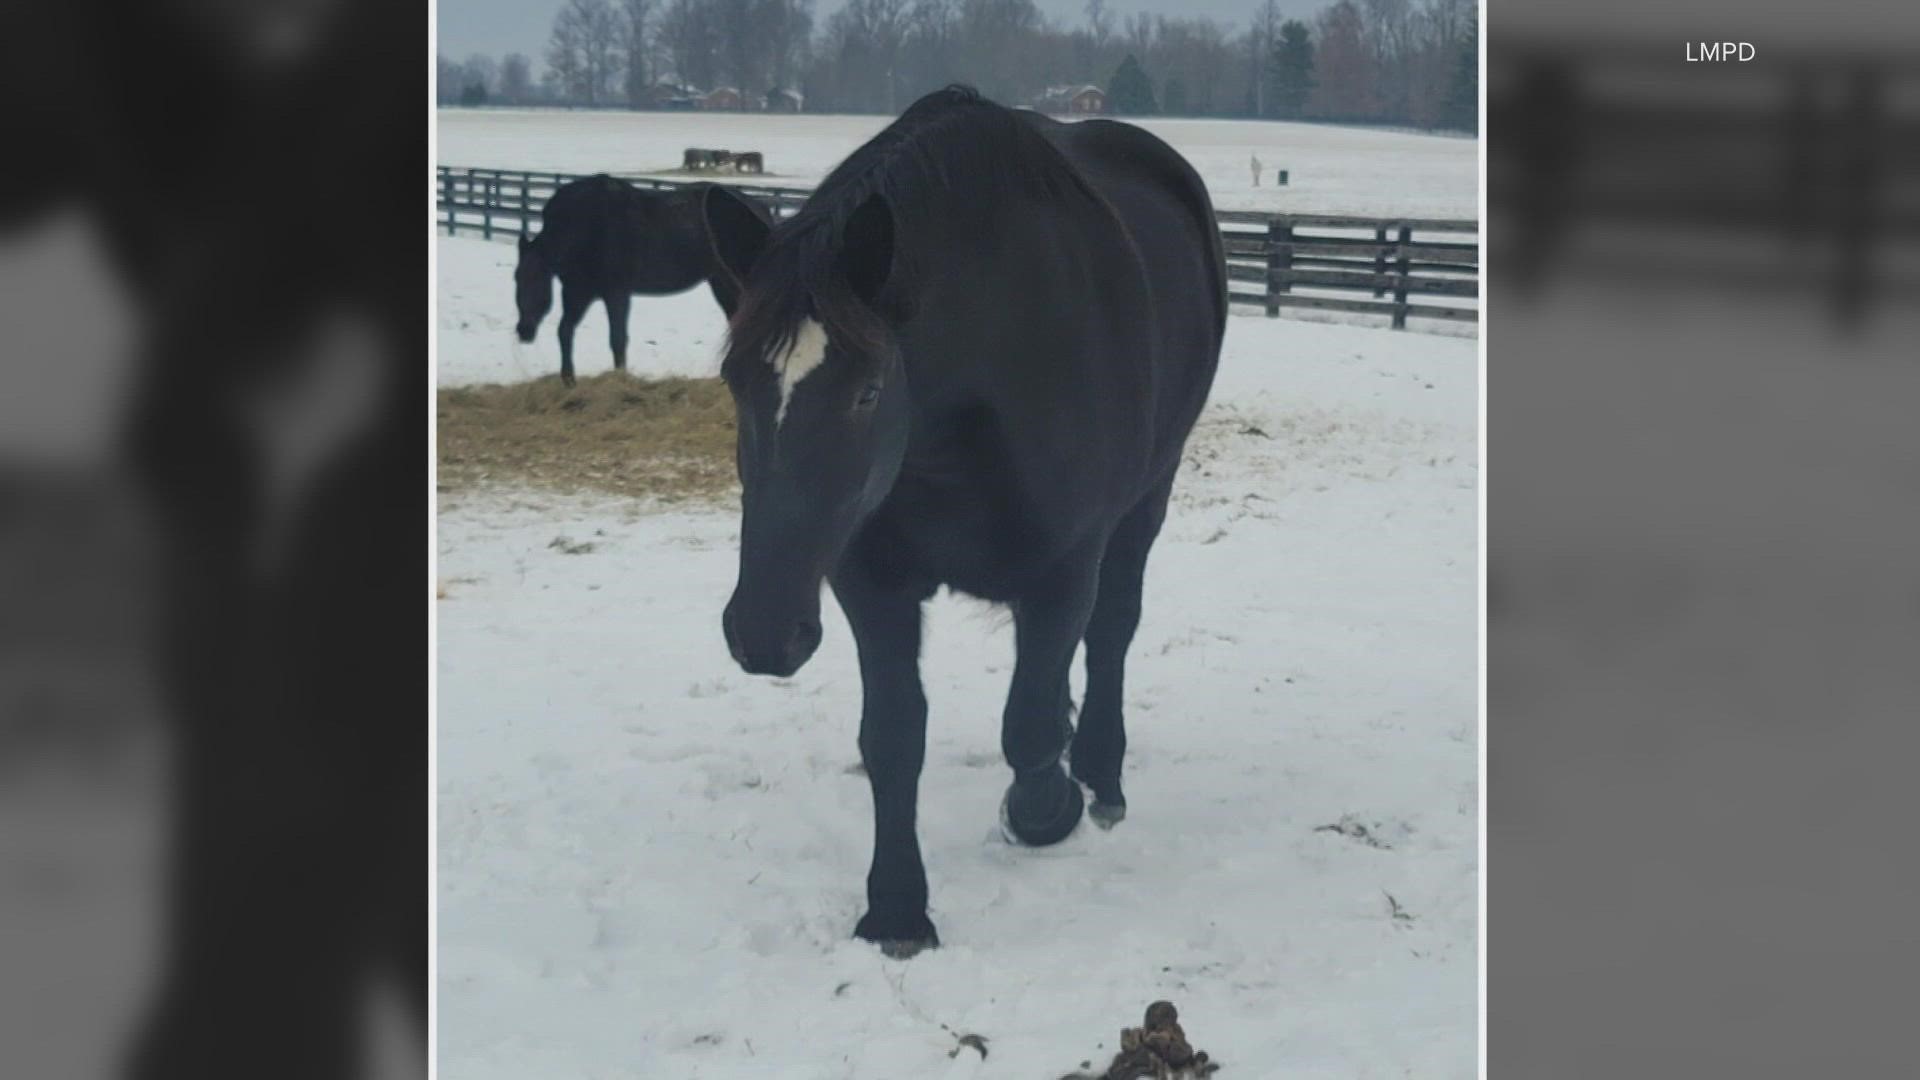 The department says the horses are still getting used to the snow.